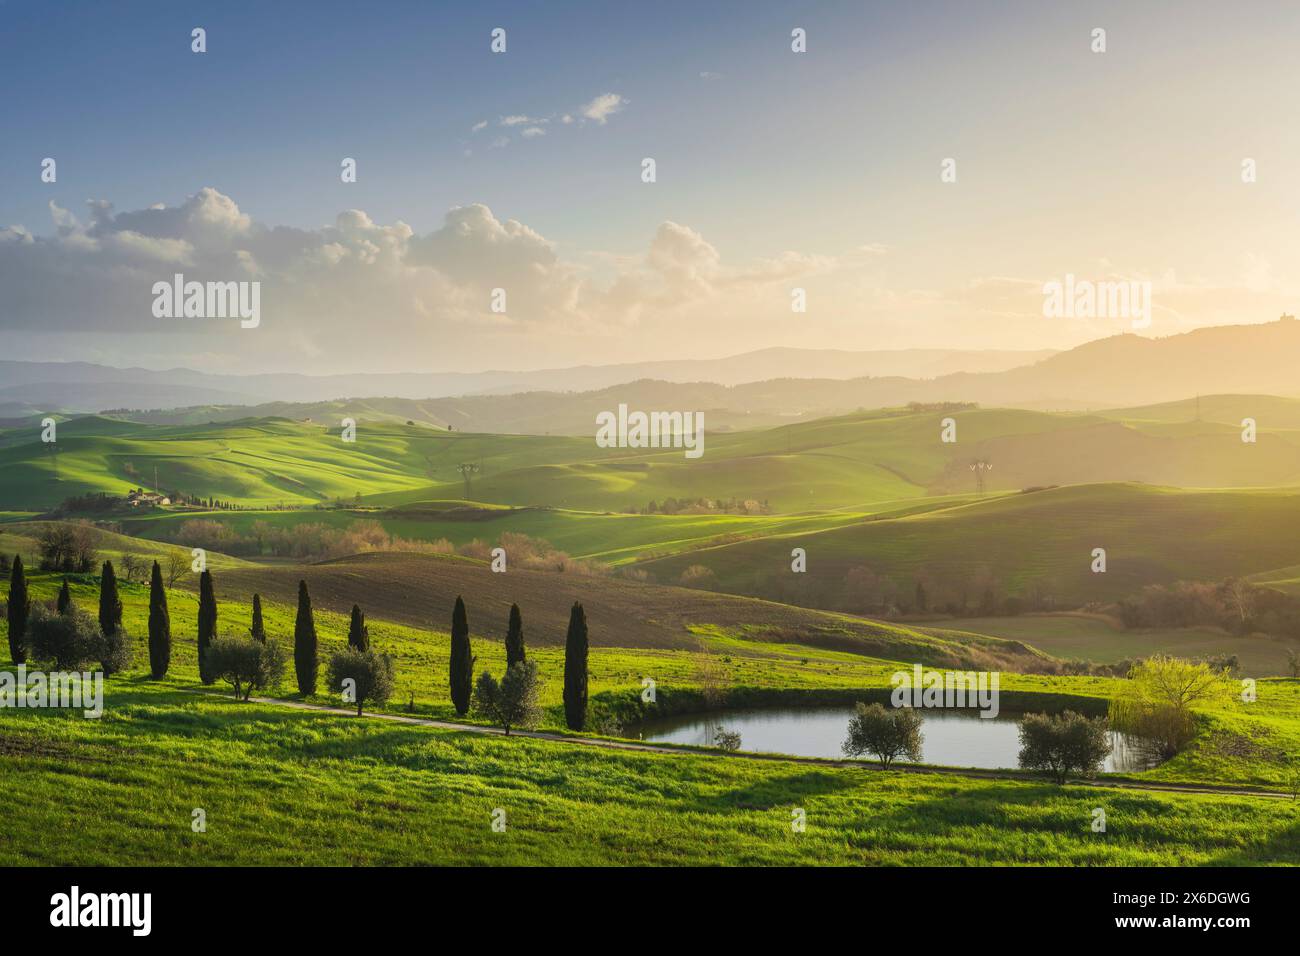 Countryside landscape, rolling hills, small lake, cypresses and olive trees at sunrise. Volterra, Tuscany region, Italy, Europe Stock Photo